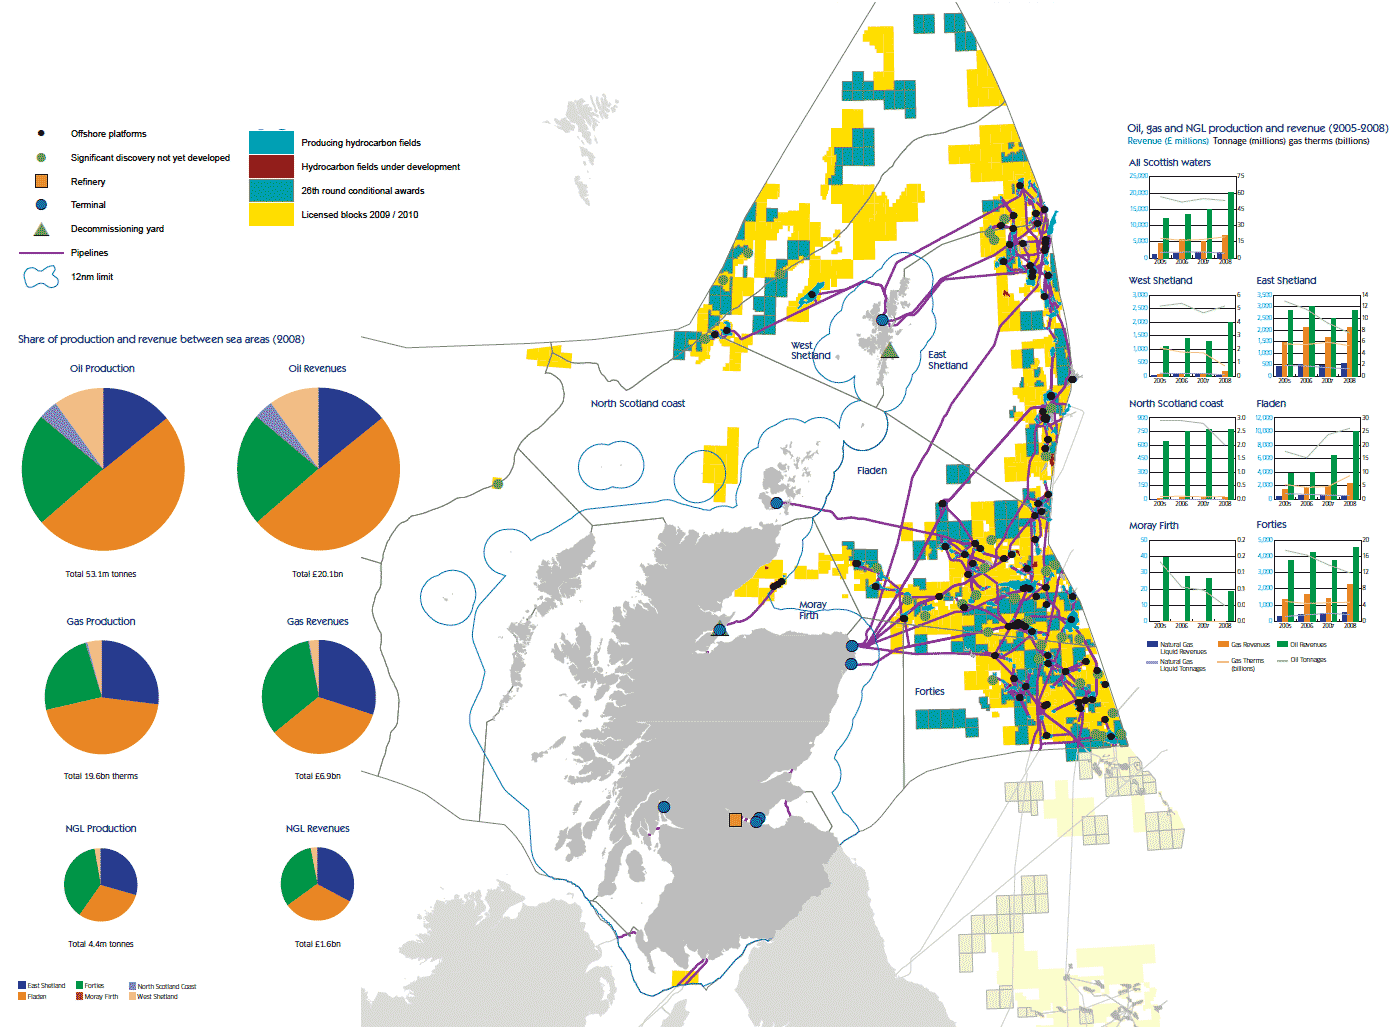 Hydrocarbon fields, platforms, pipelines, coastal infrastructure and production (tonnage) and revenue per sea area (2005-2008)